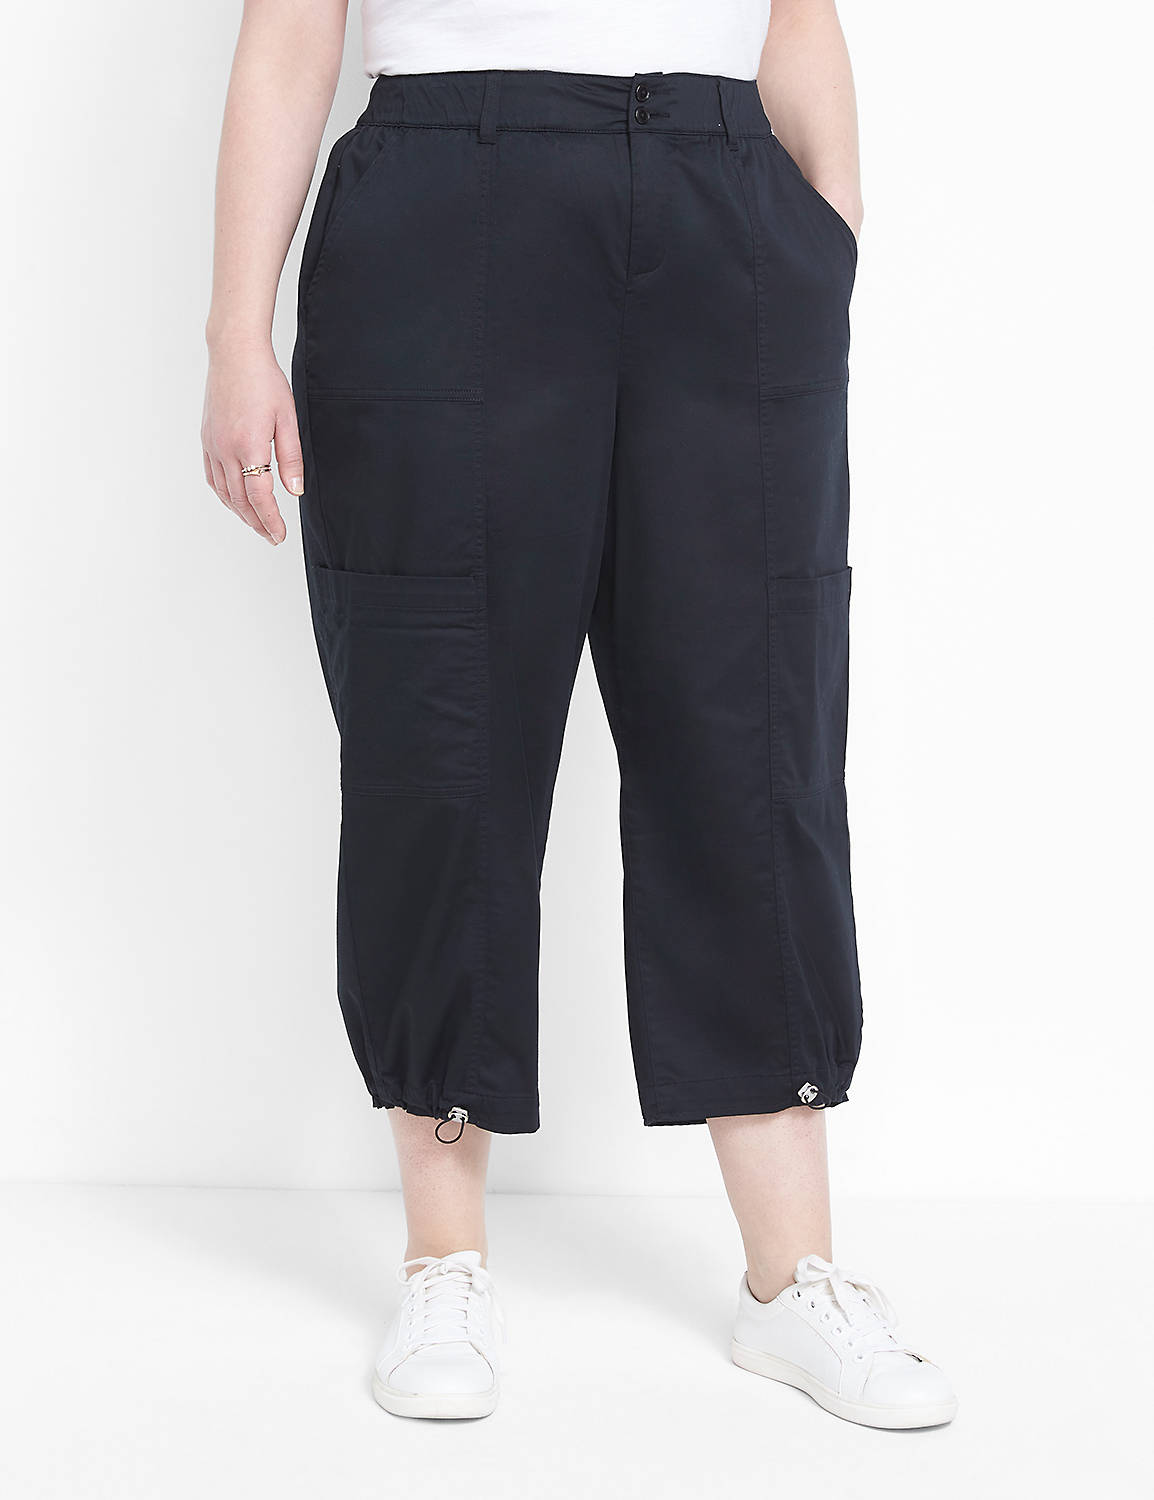 Soften Sateen Jogger 1125361 Product Image 1